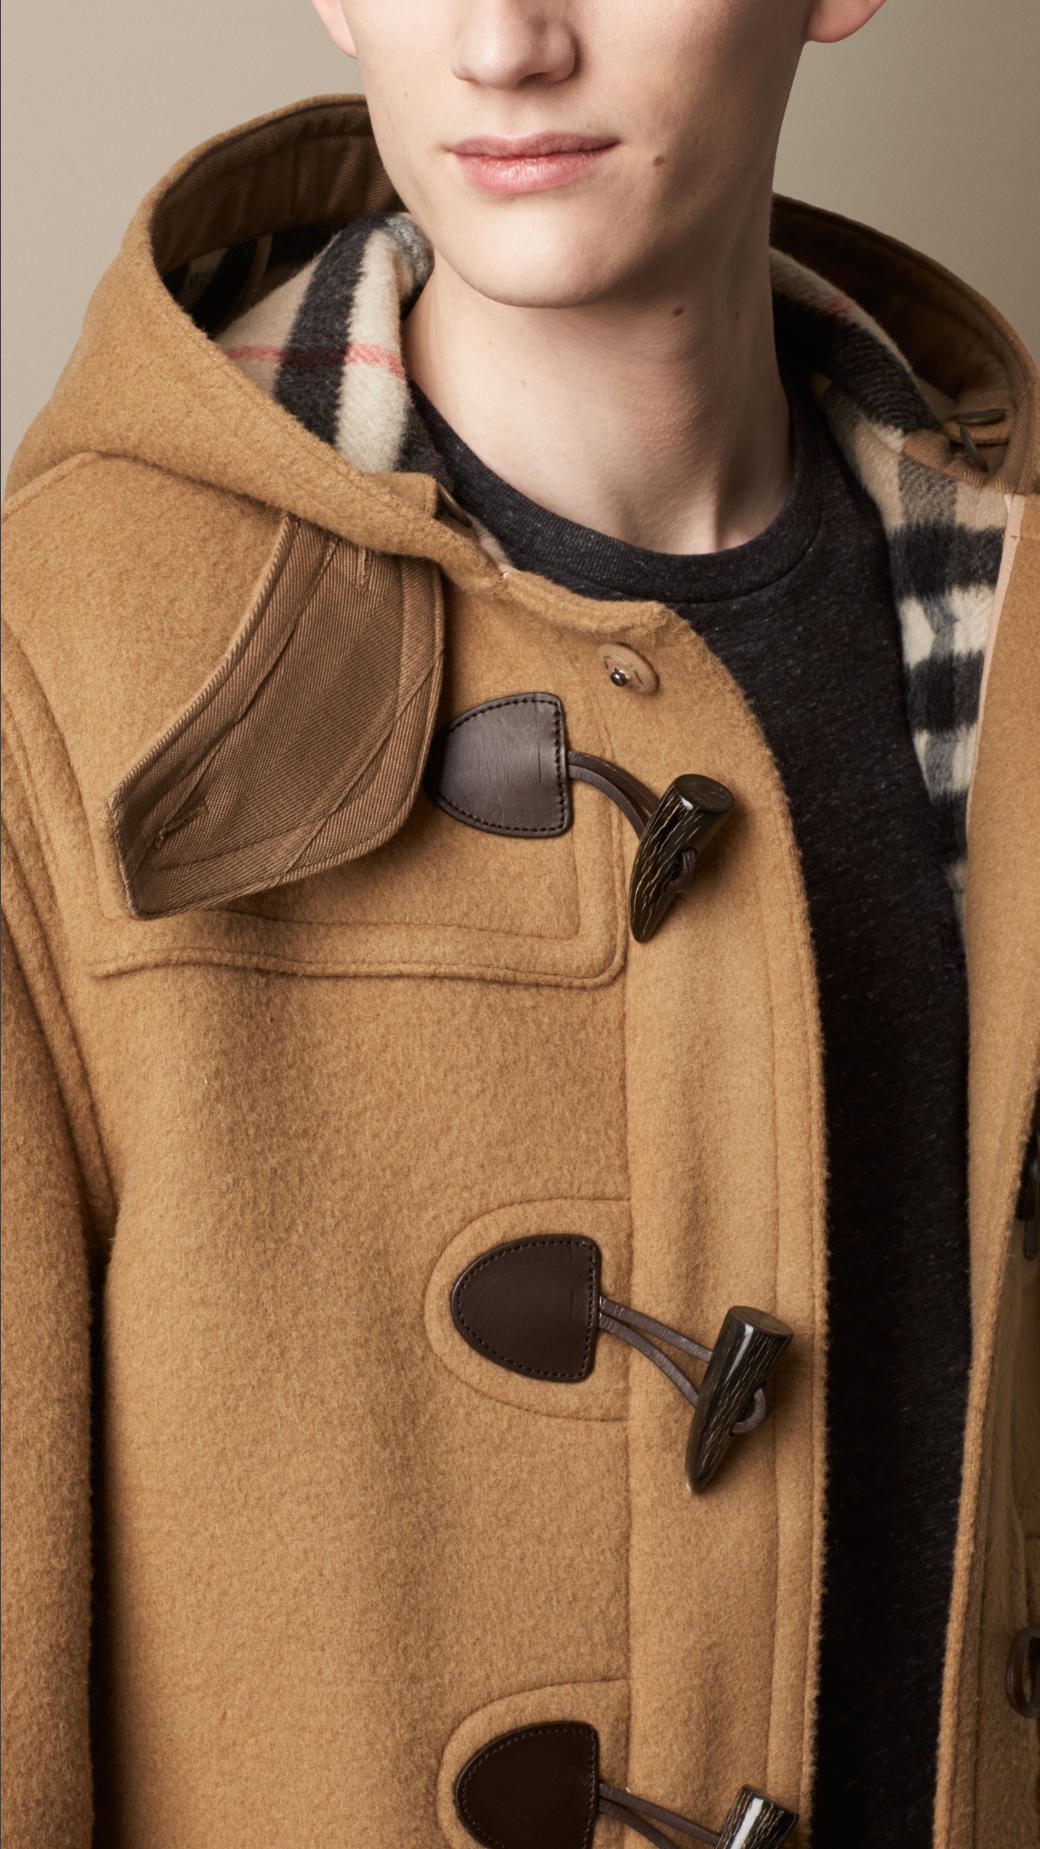 Burberry Oversize Wool Duffle Coat in Natural for Men | Lyst